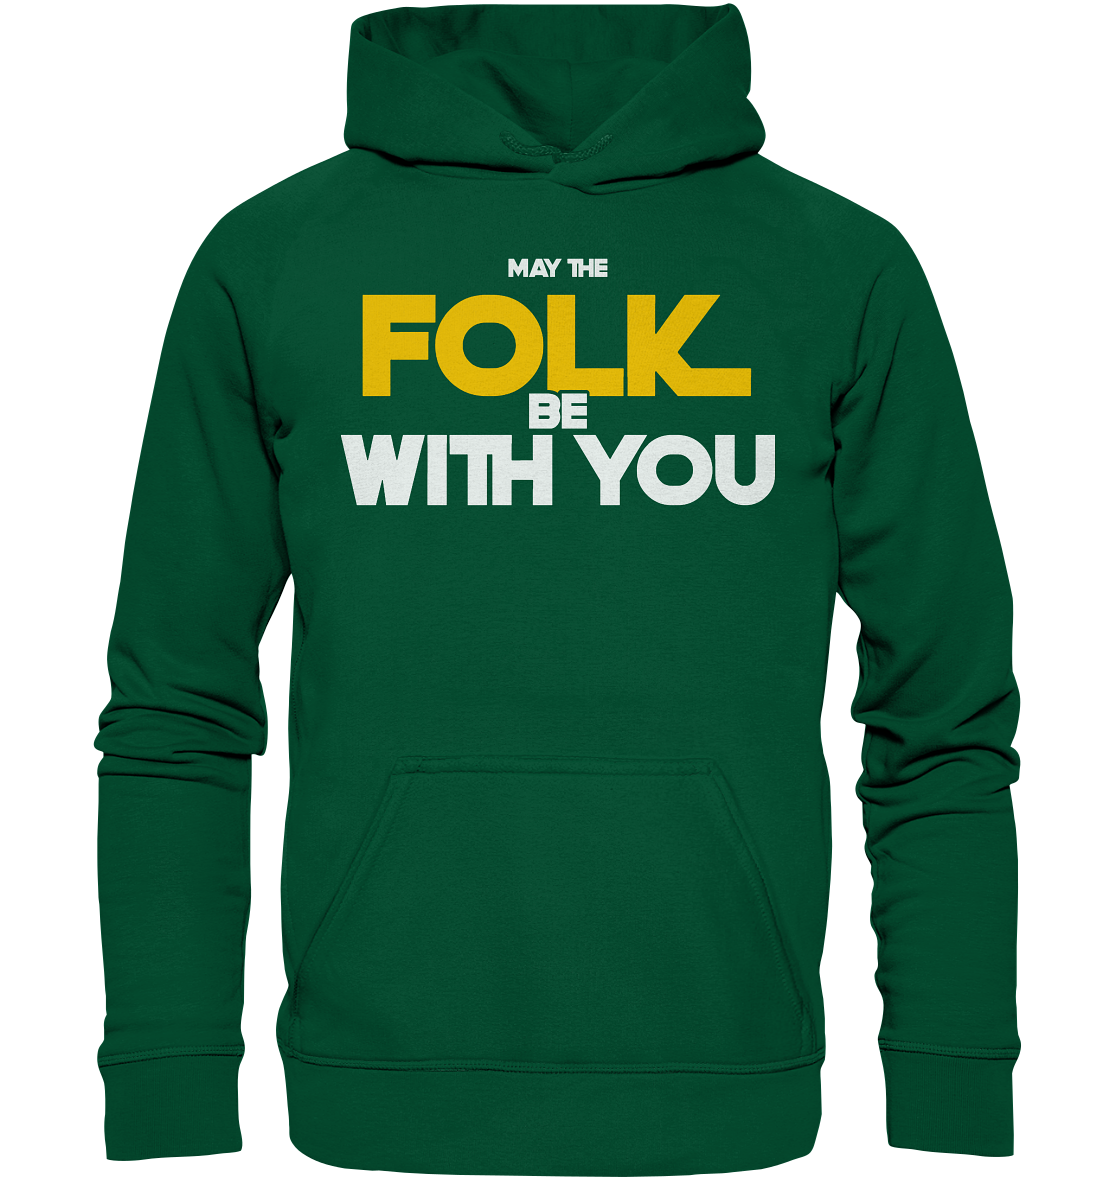 May The Folk Be With You - Basic Unisex Hoodie